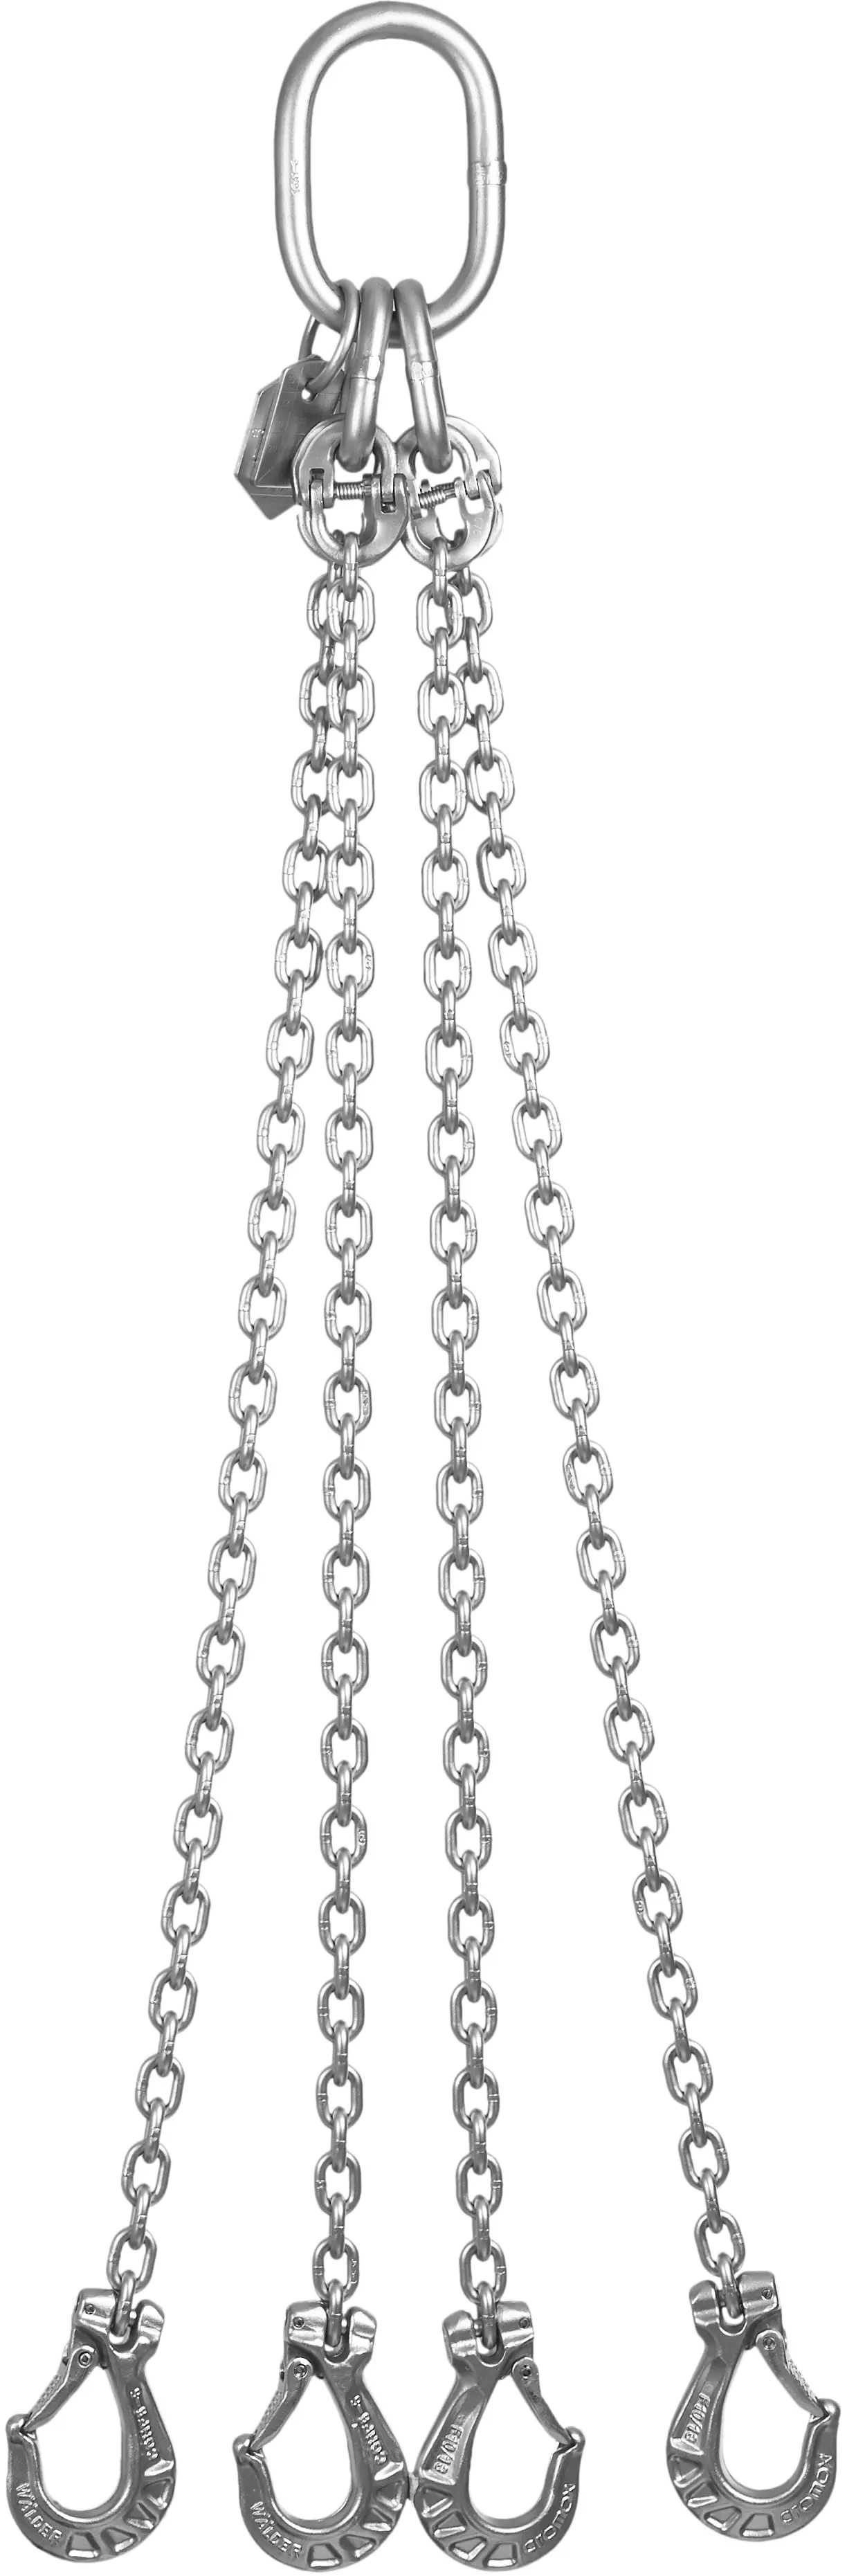 Stainless steel chain slings (4-leg) from cromox® (modular system with connecting link)